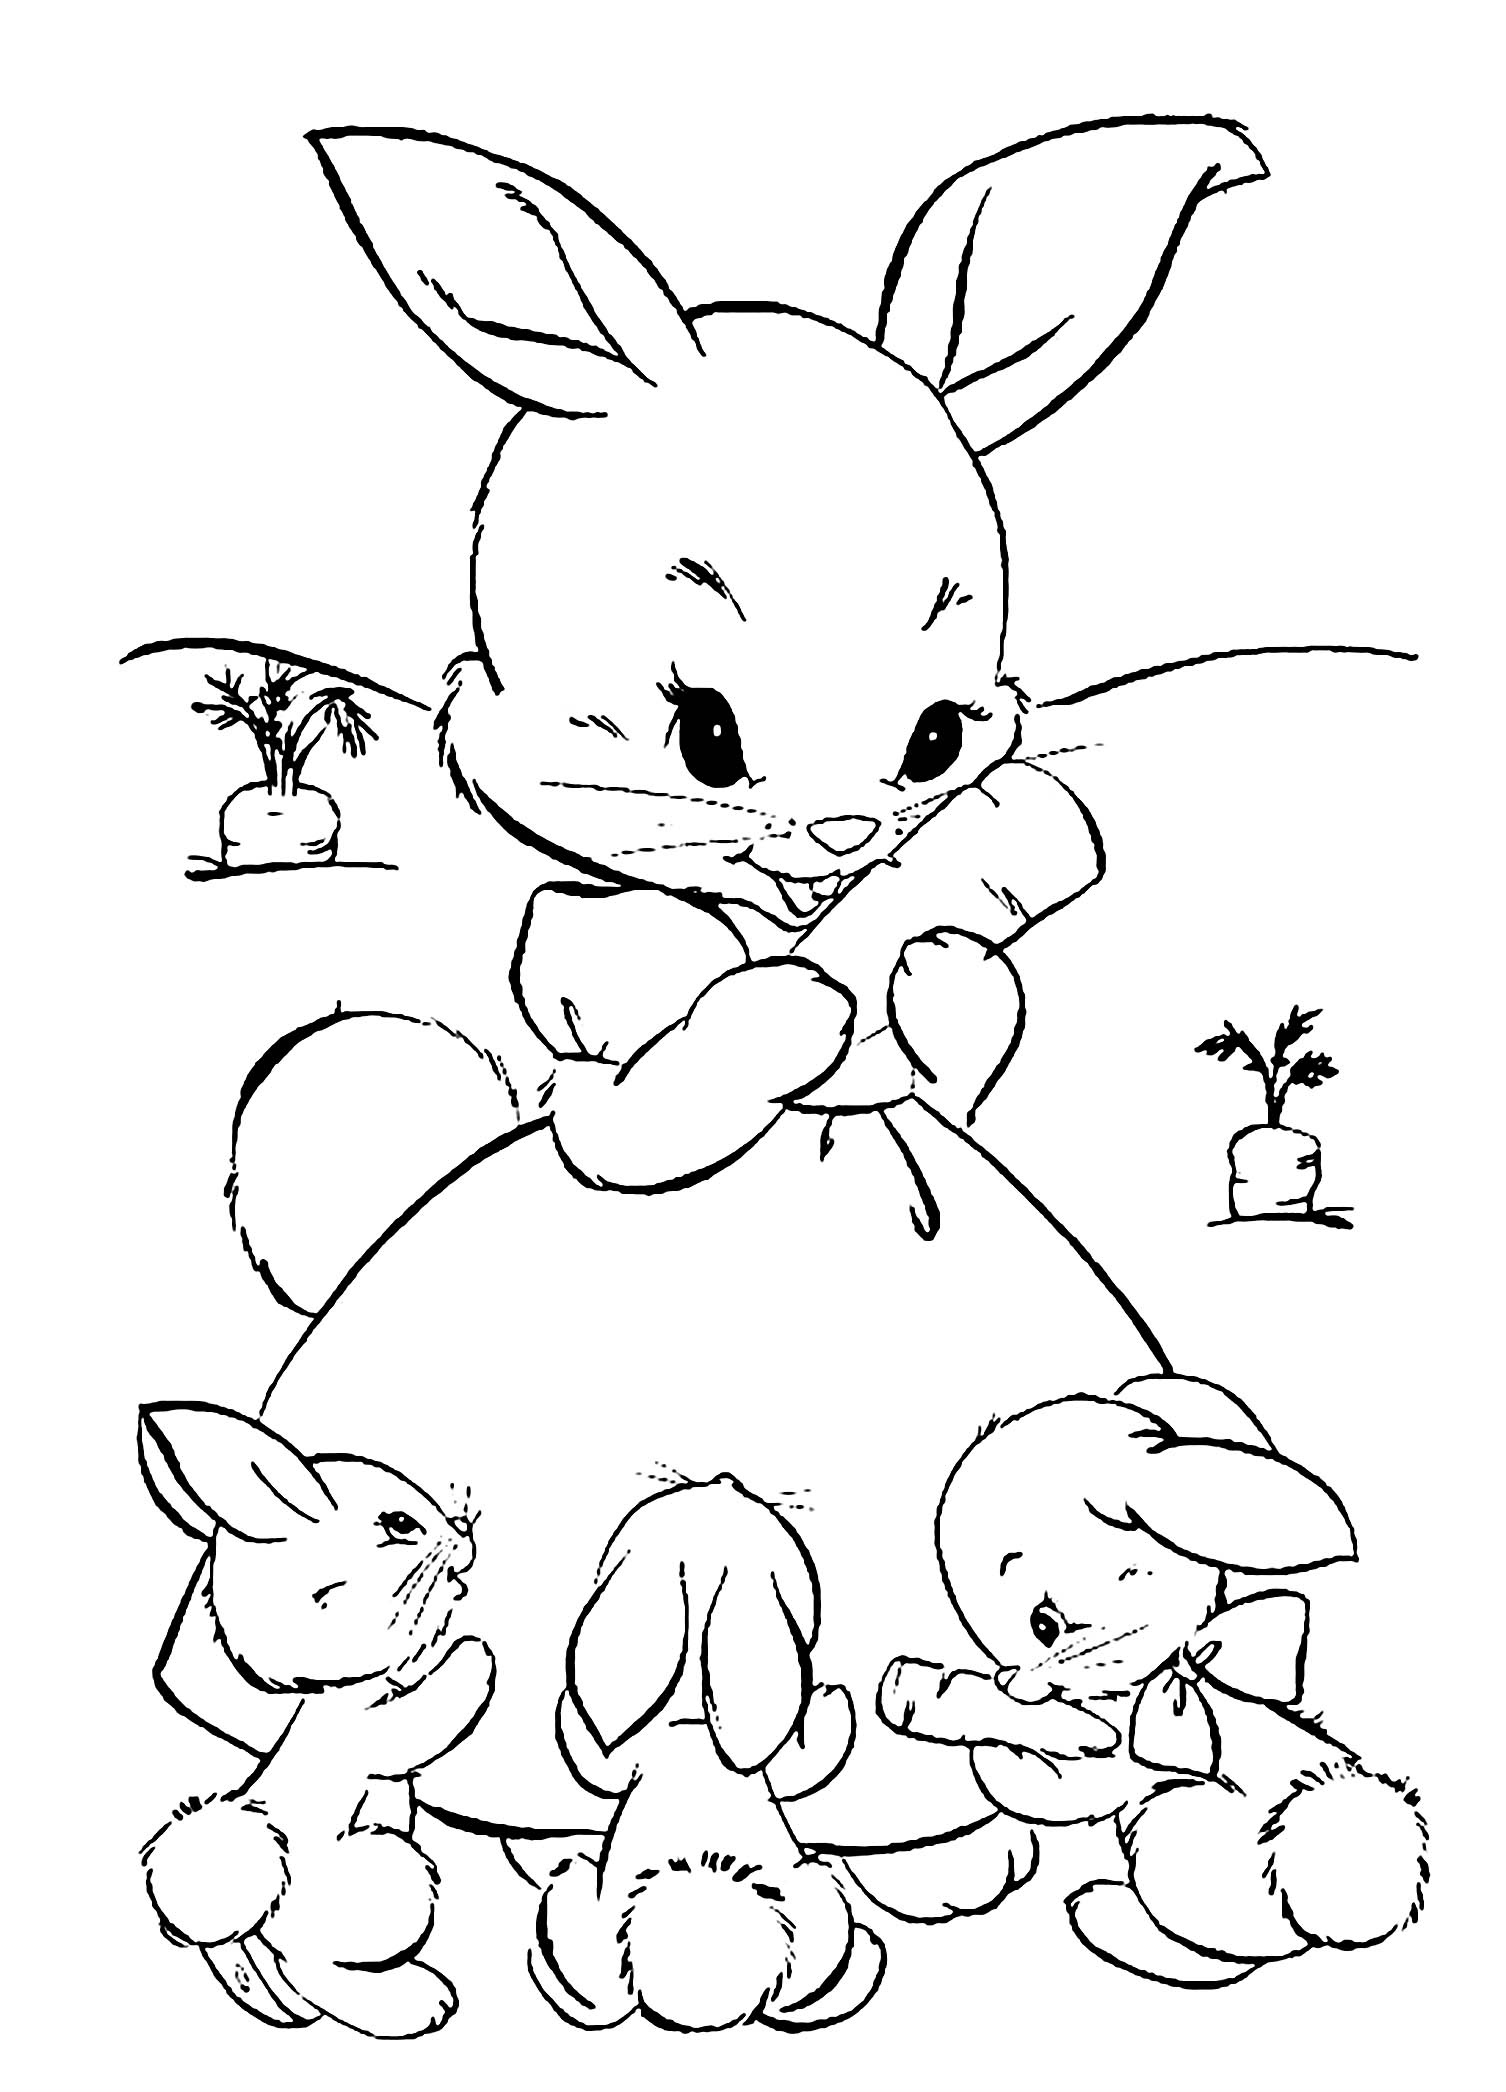 Nice simple rabbit coloring for kids